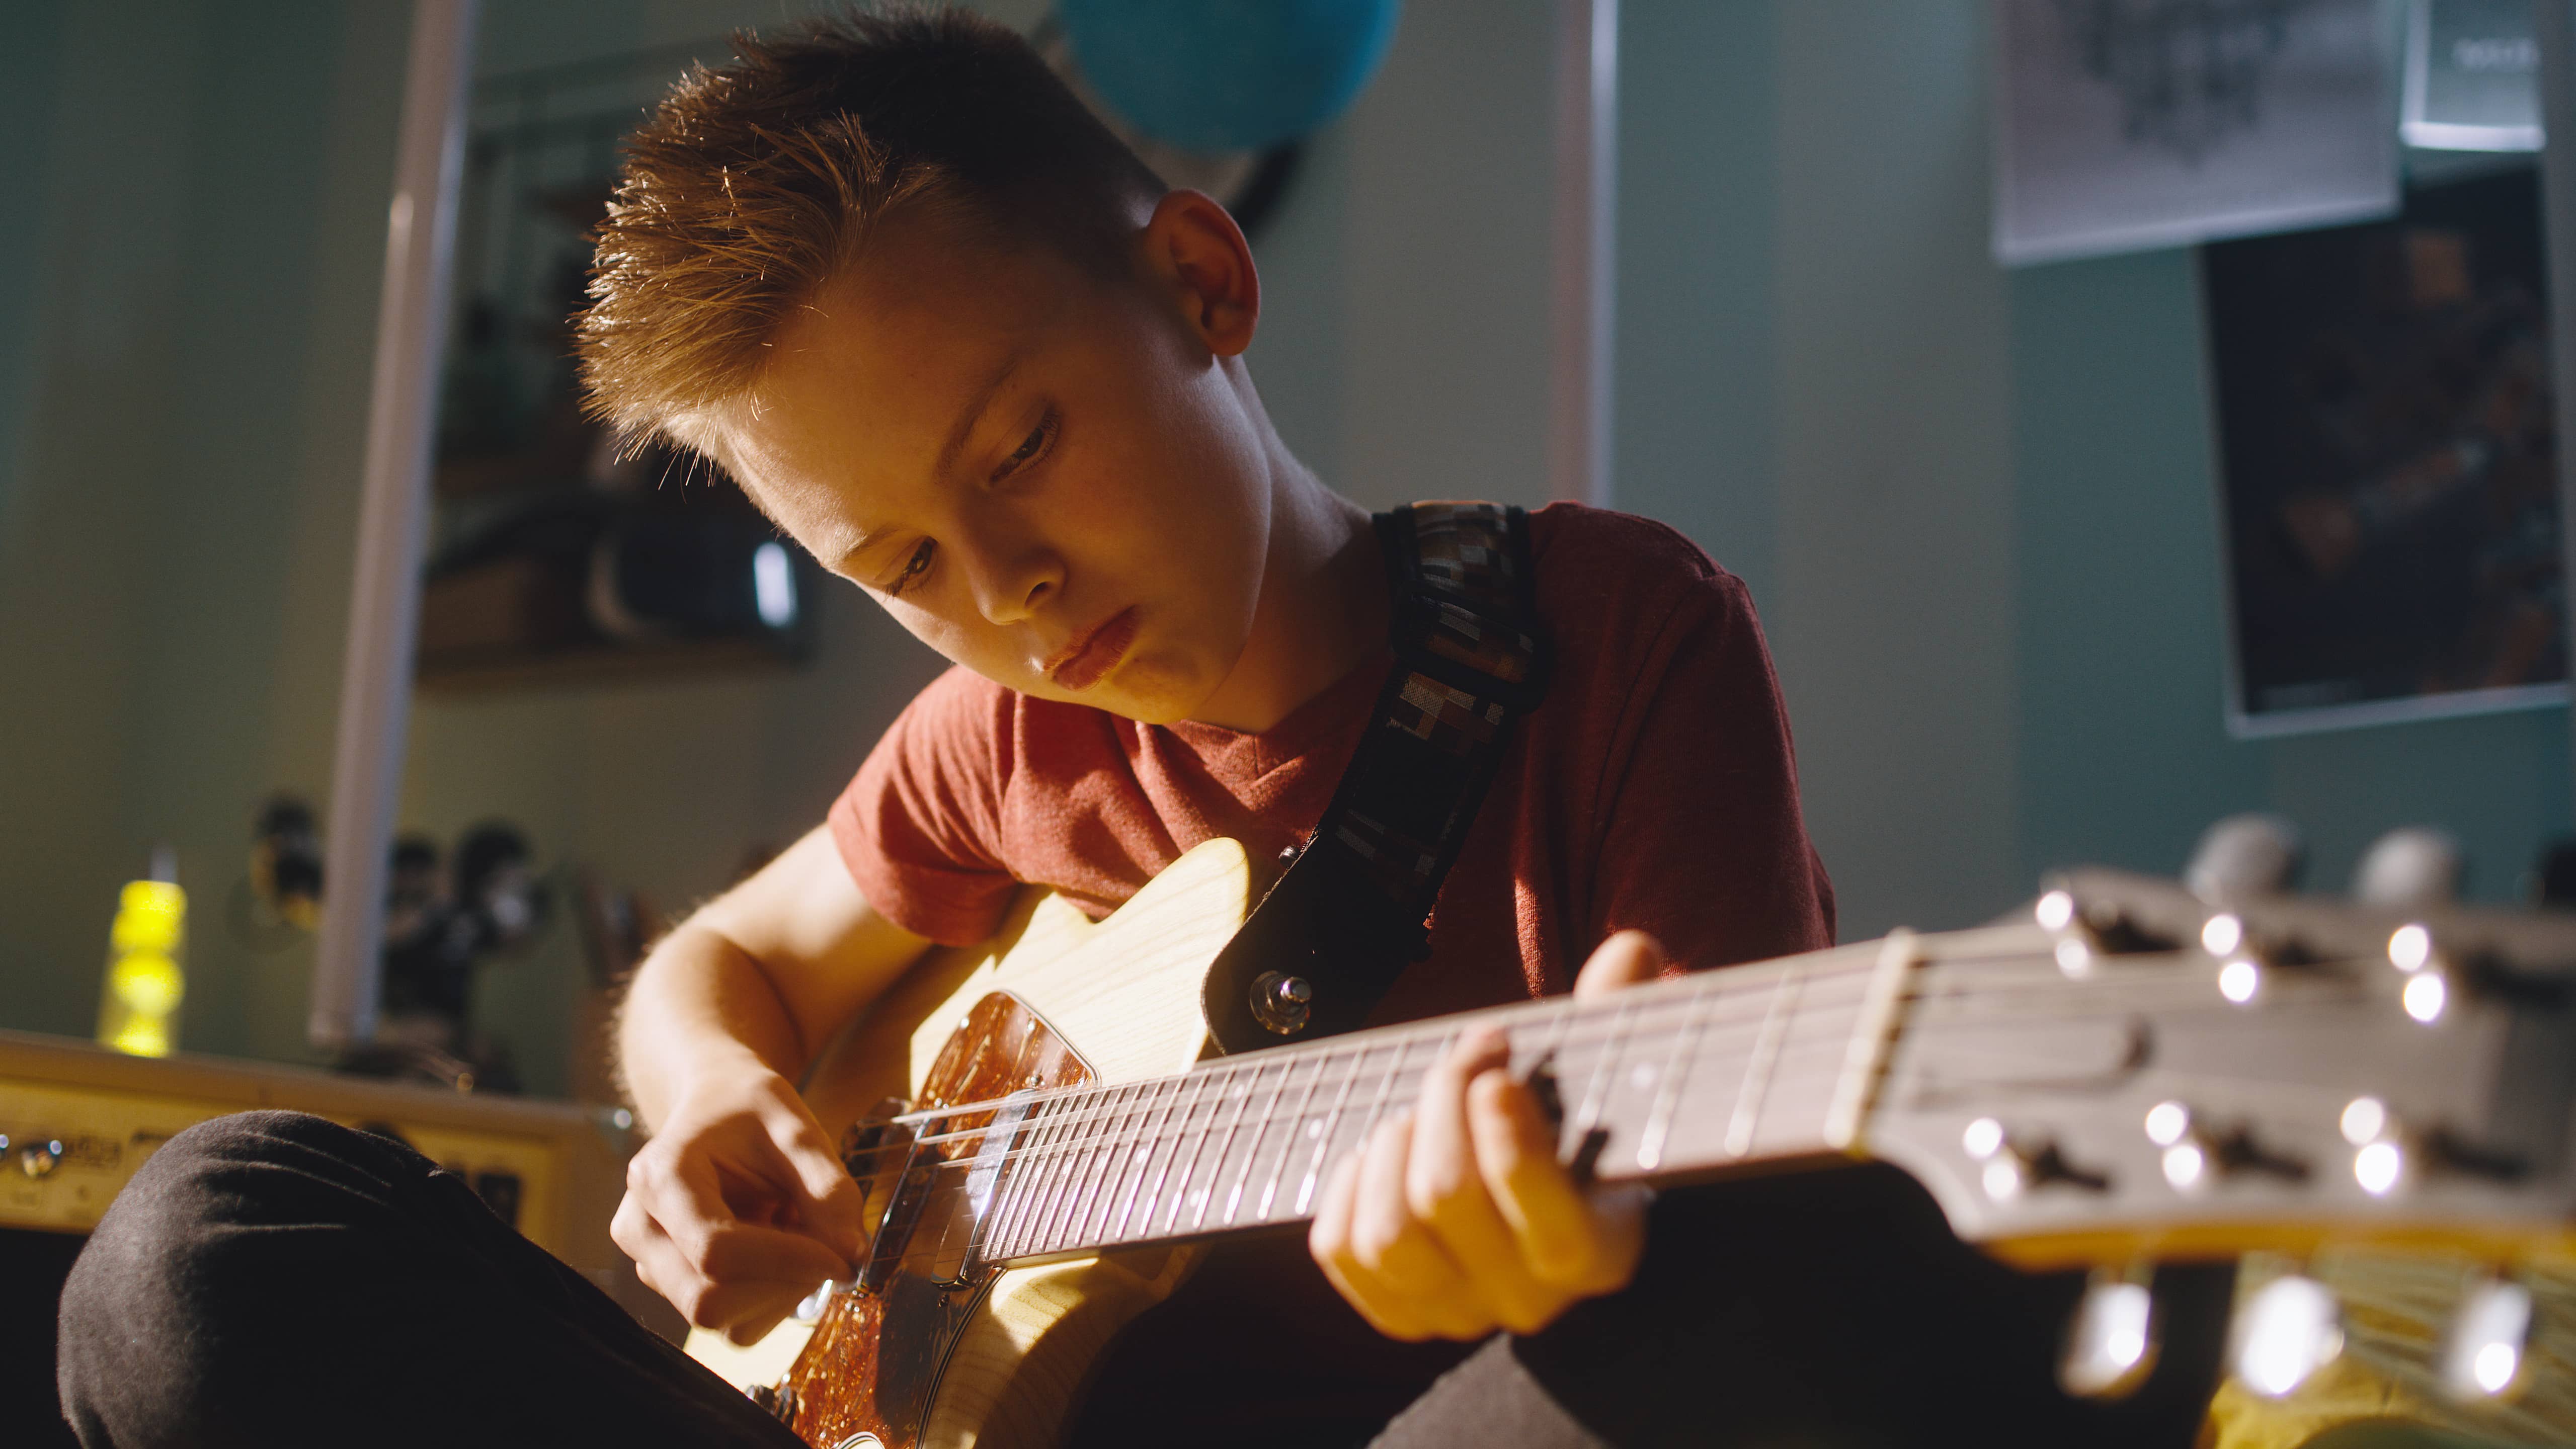 Teen boy playing guitar in his bedroom to destress and self-regulate himself.